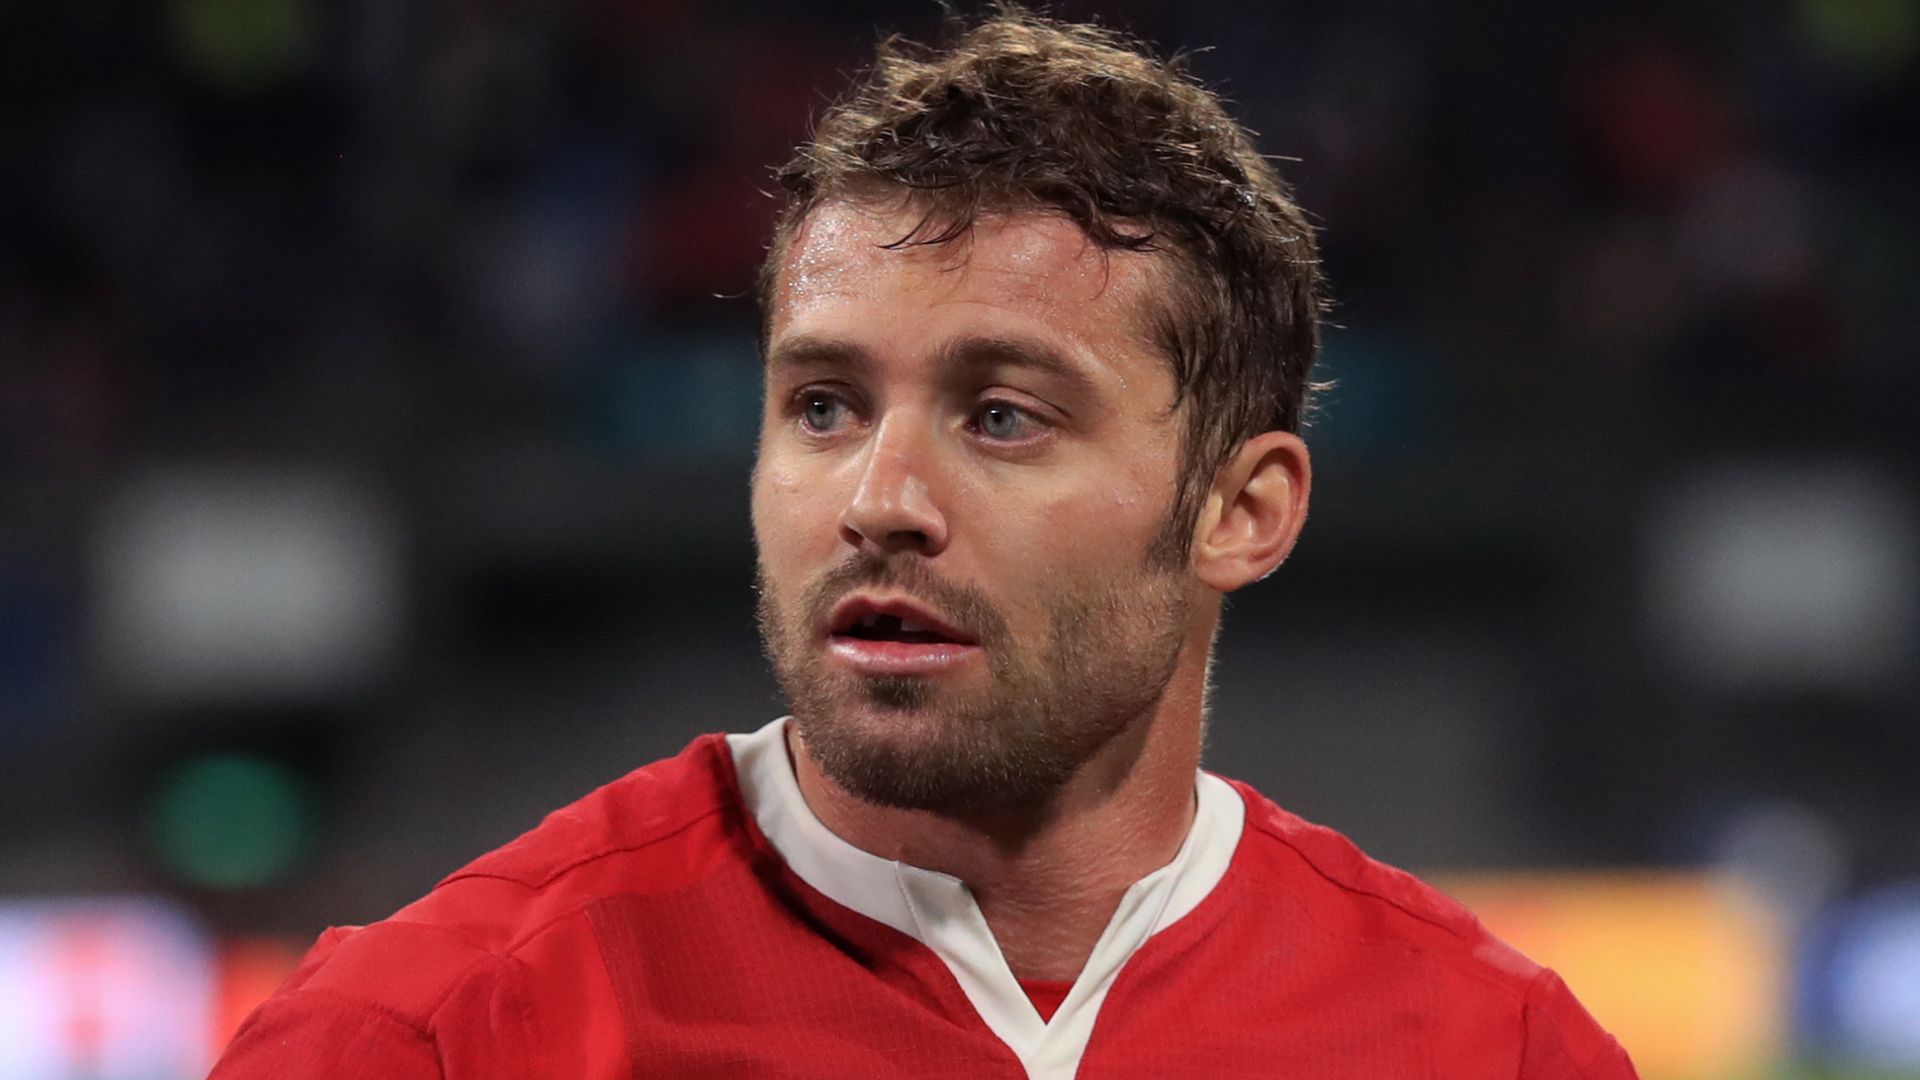 Wales centurion Halfpenny to retire from international rugby